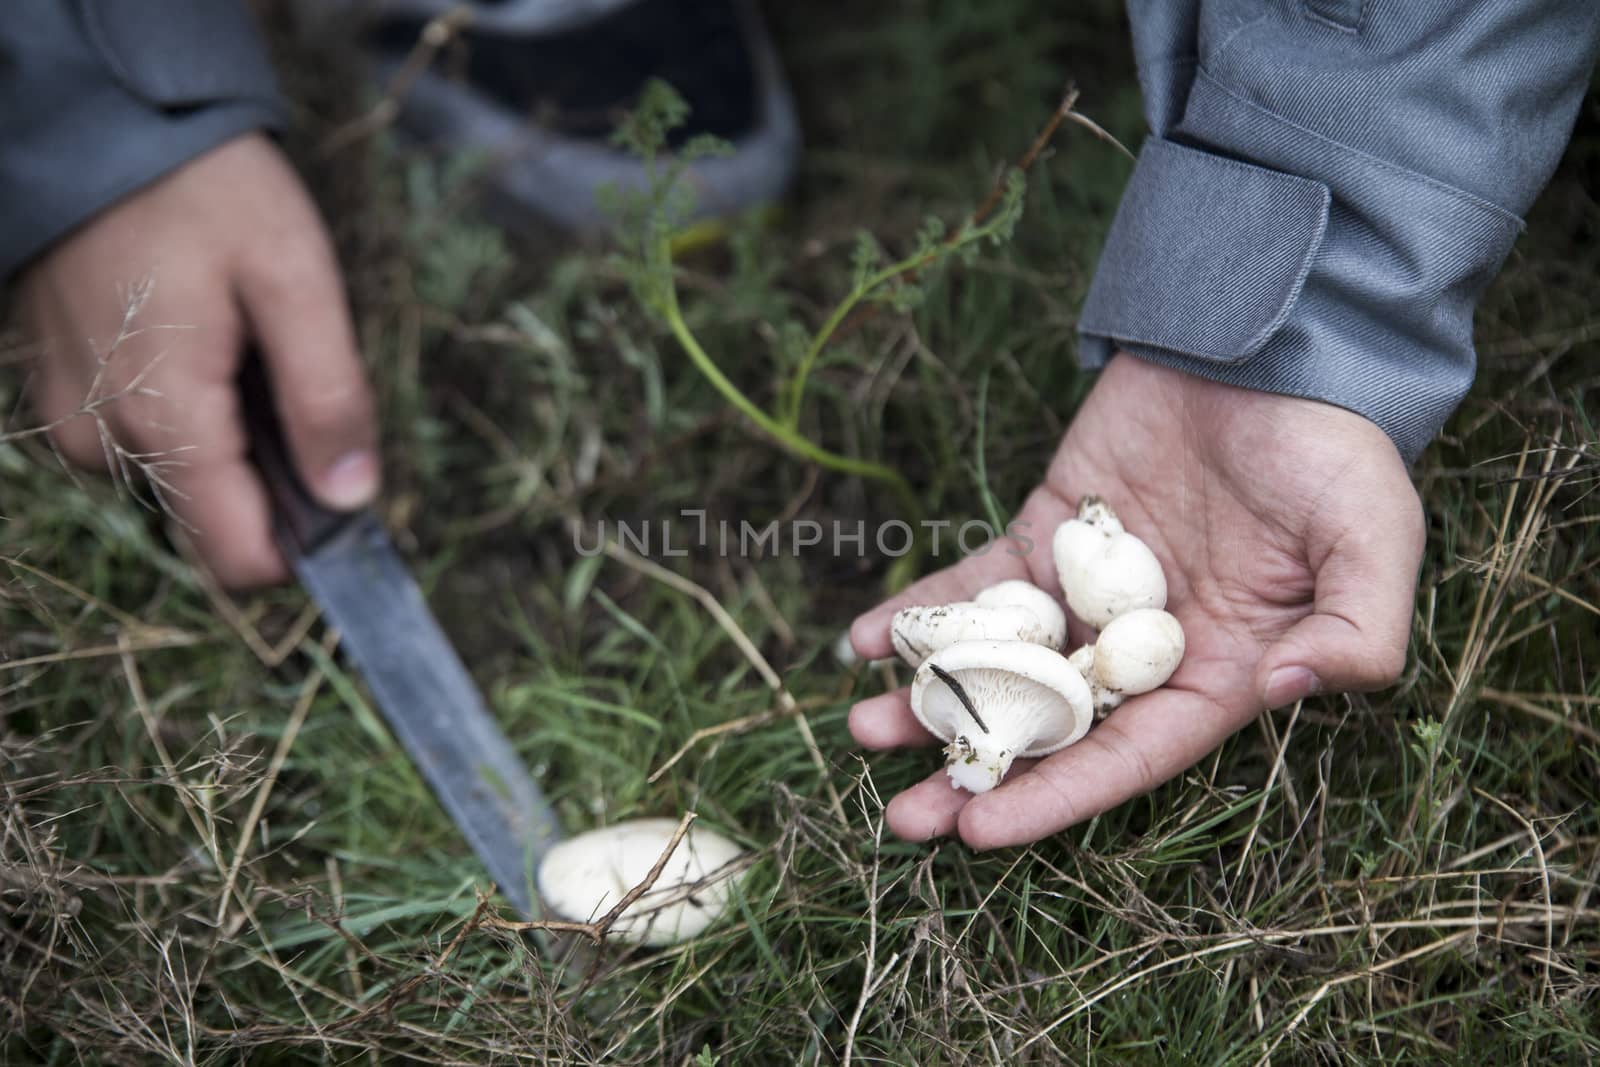 Man collecting mushrooms by snep_photo